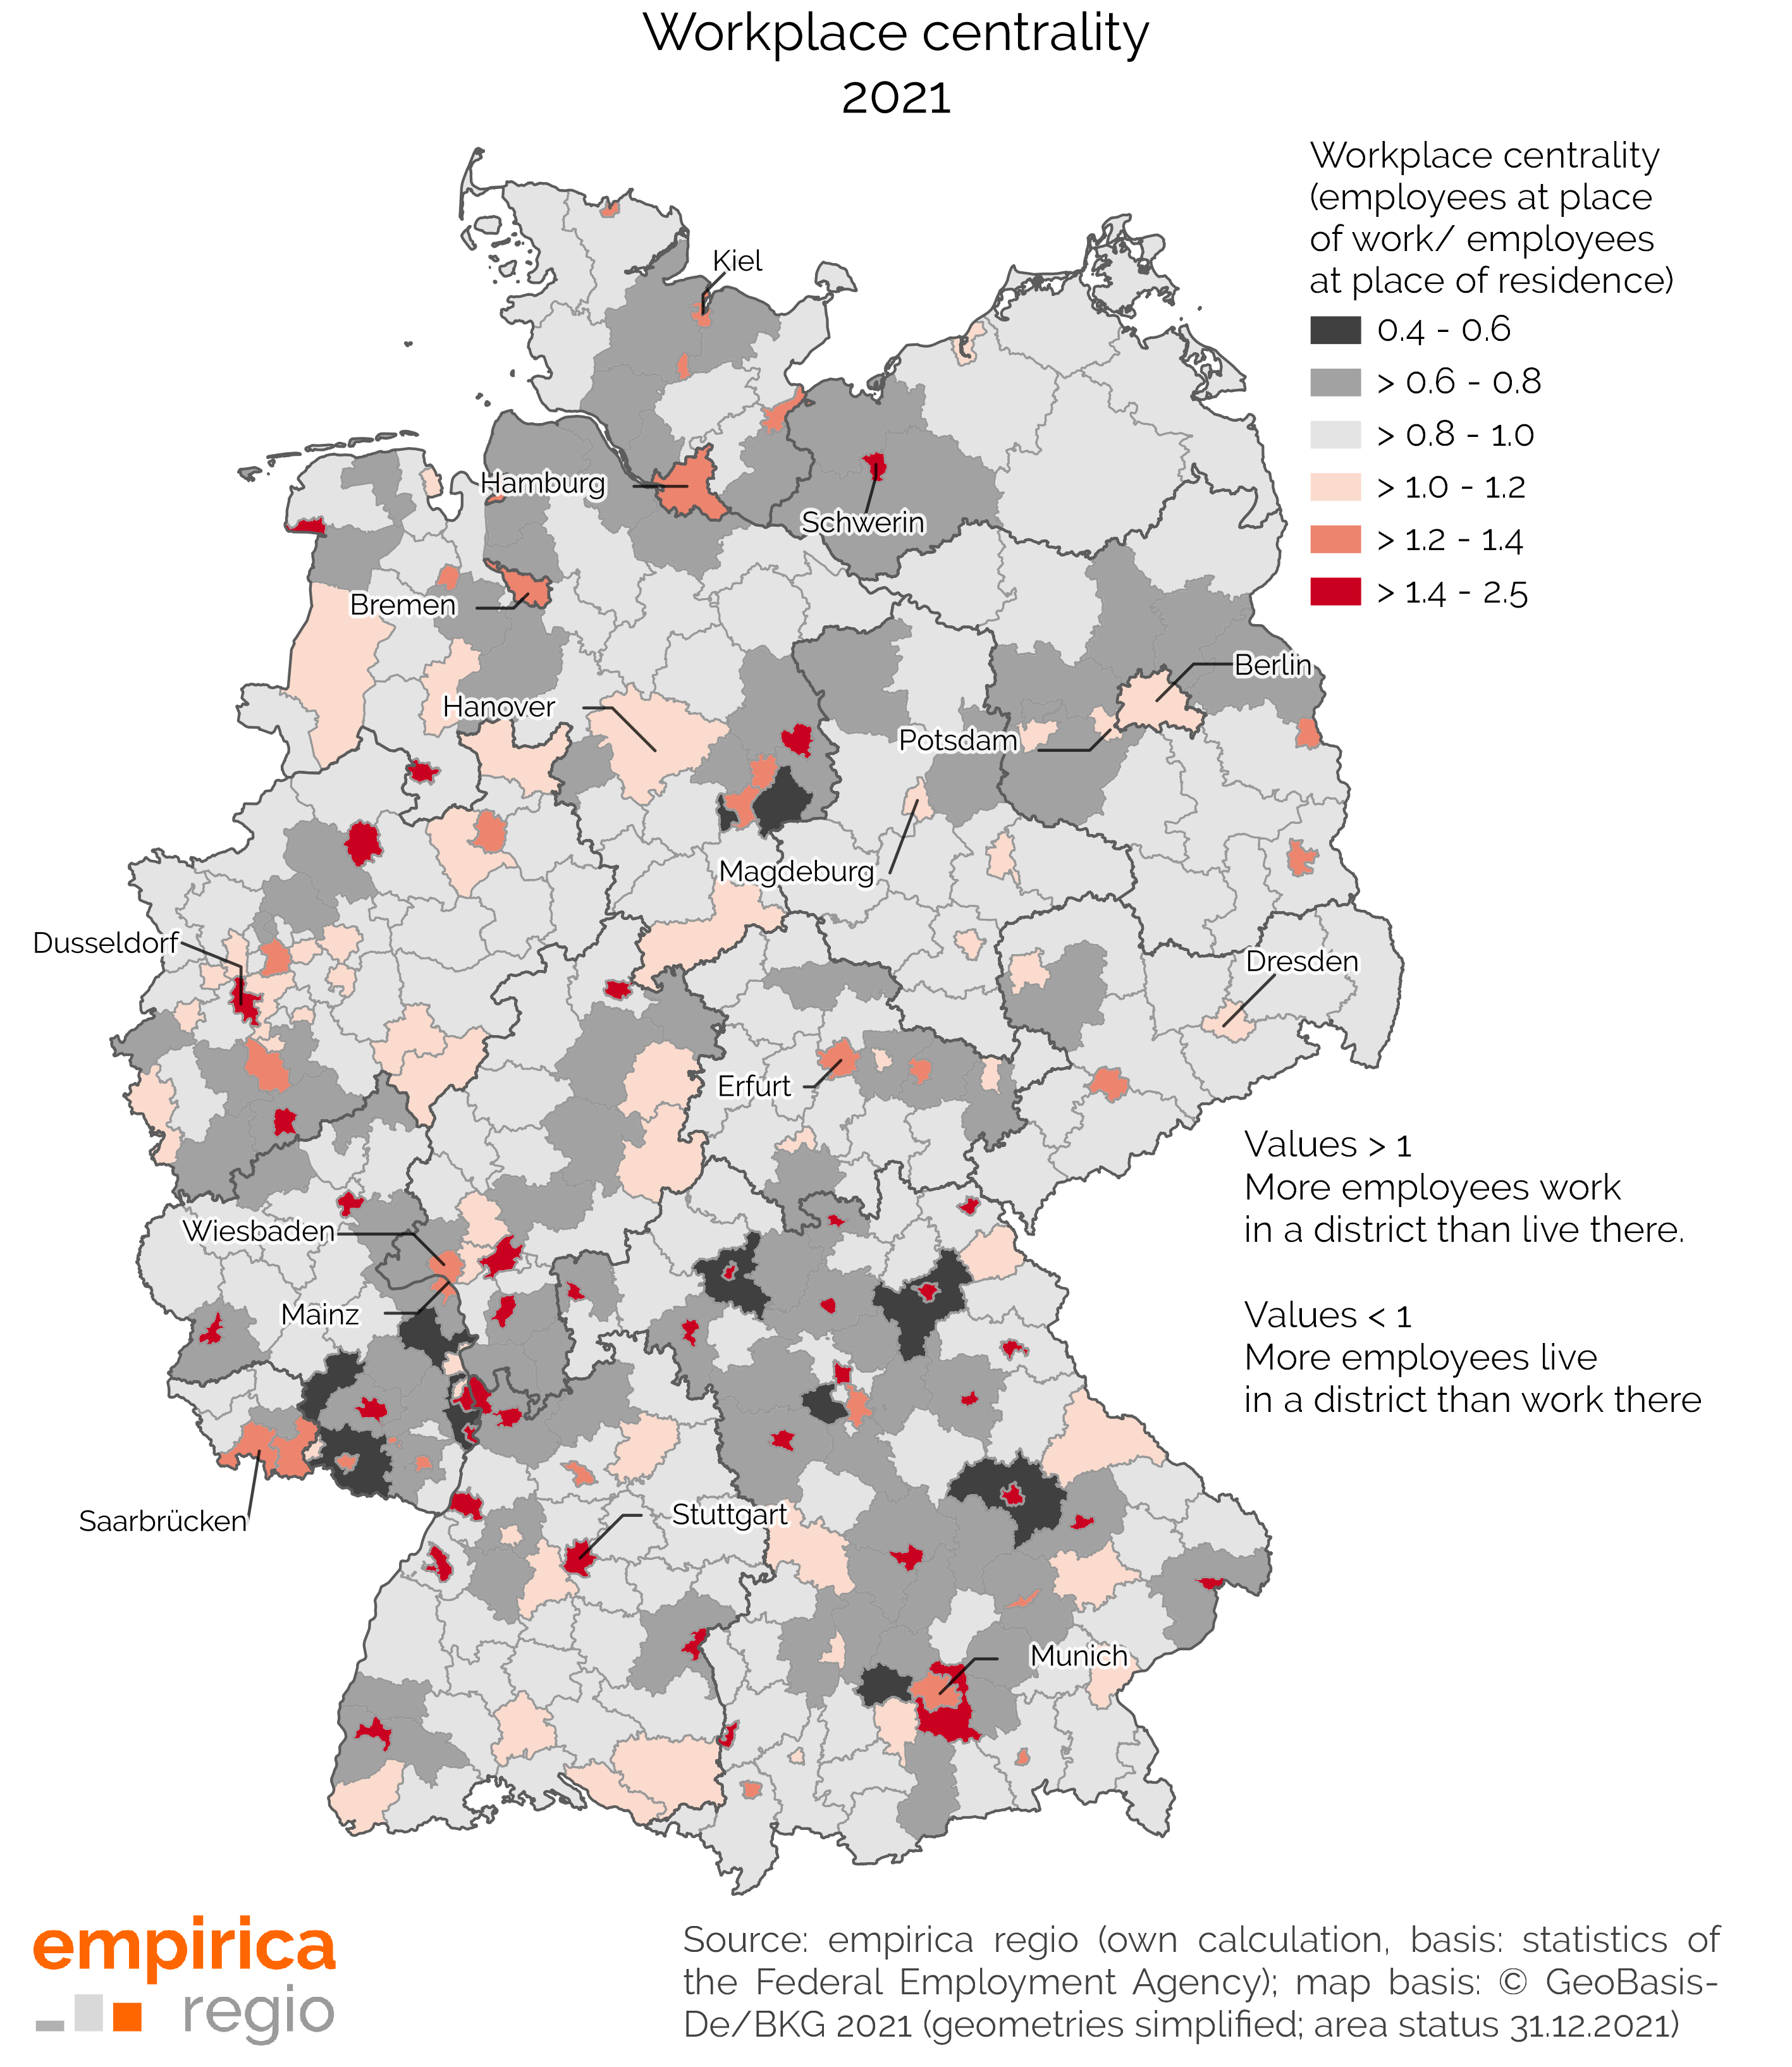 Workplace centrality in the districts in Germany 2021